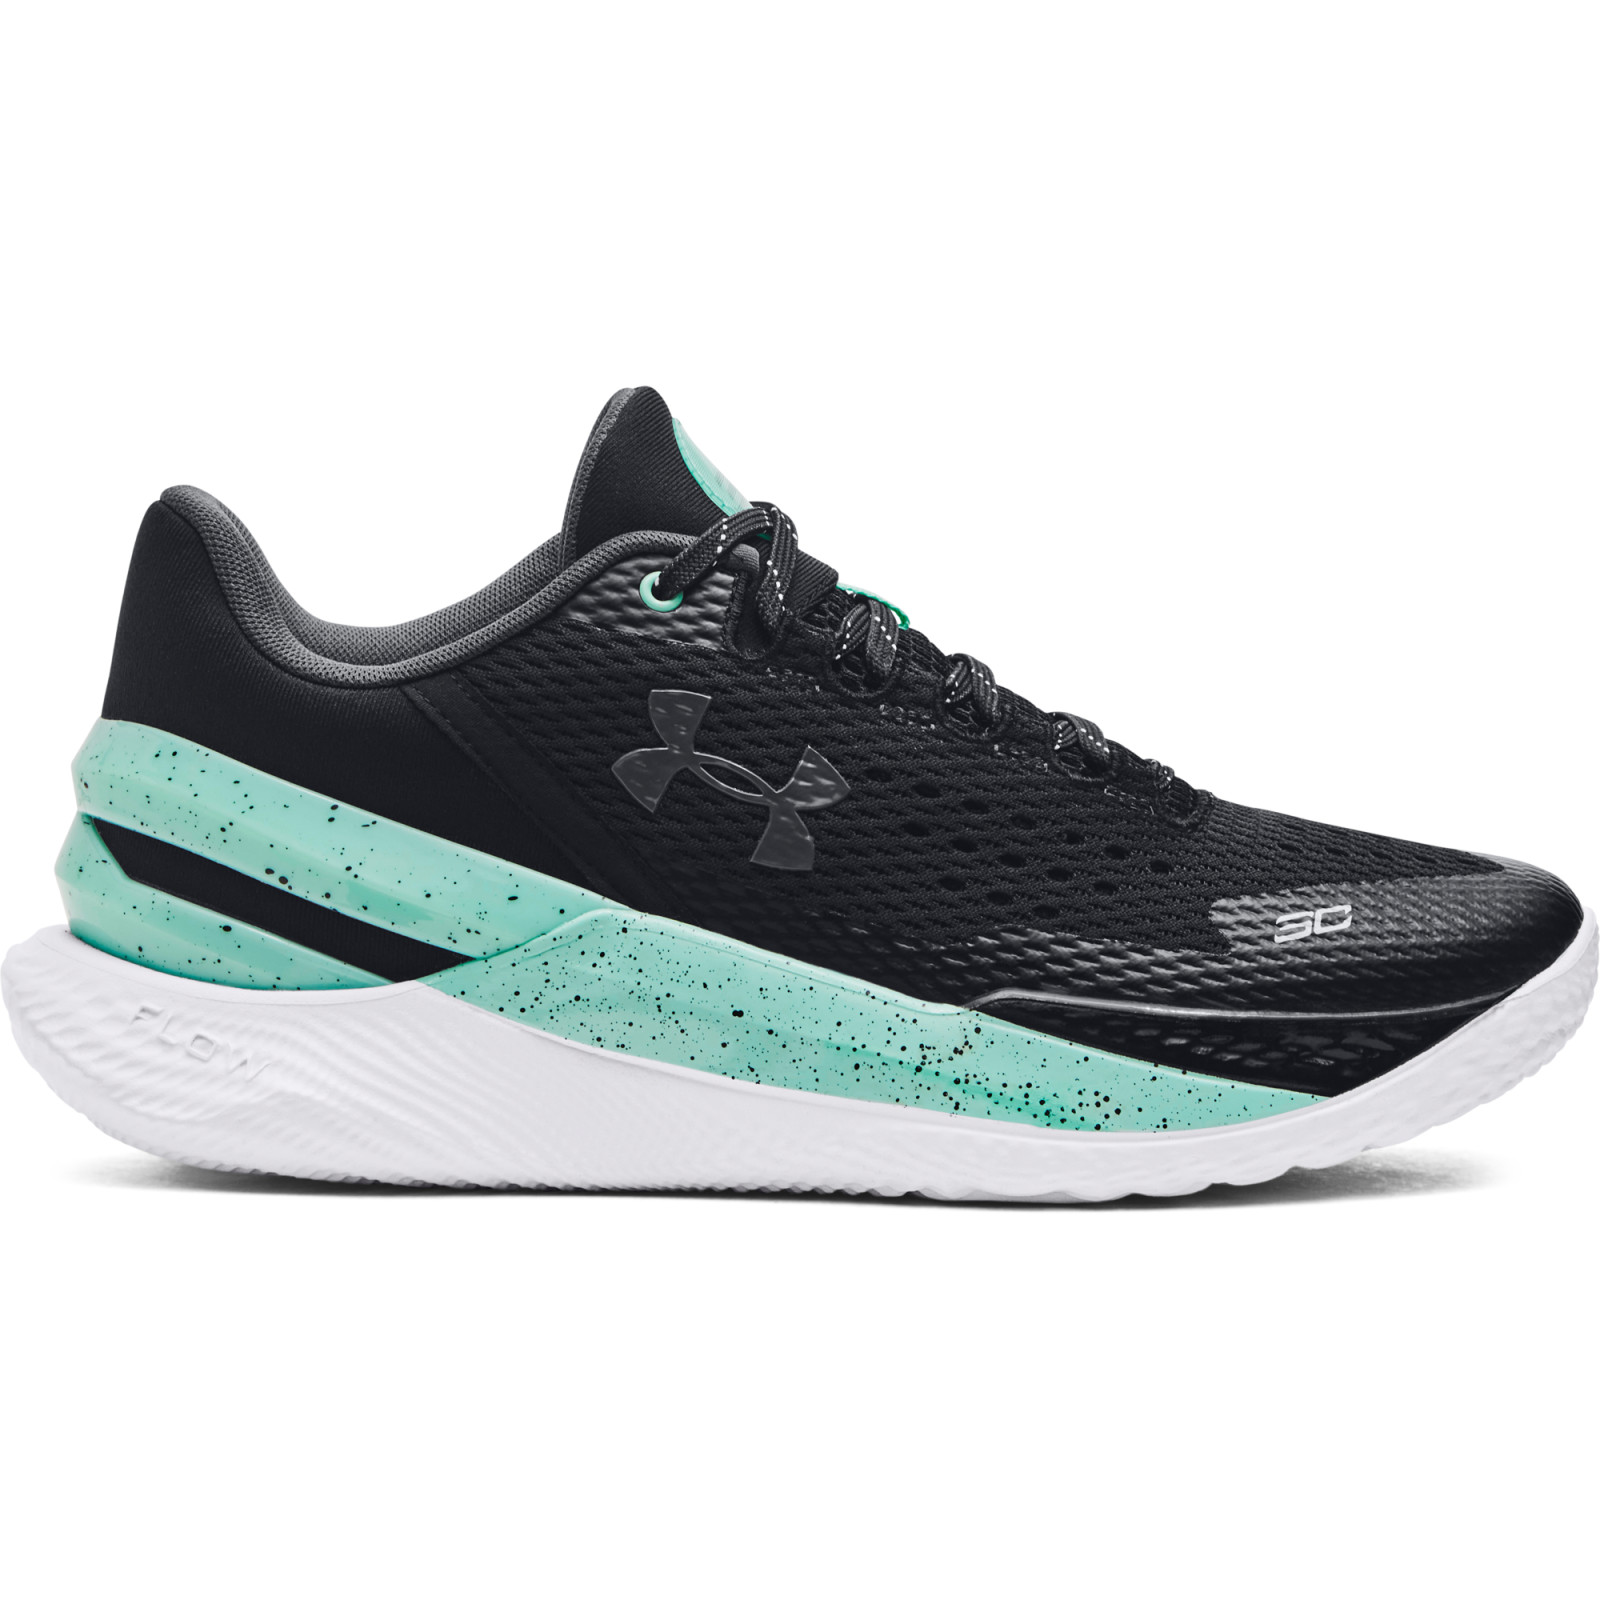 Under Armour CURRY 2 LOW FLOTRO 45,5.